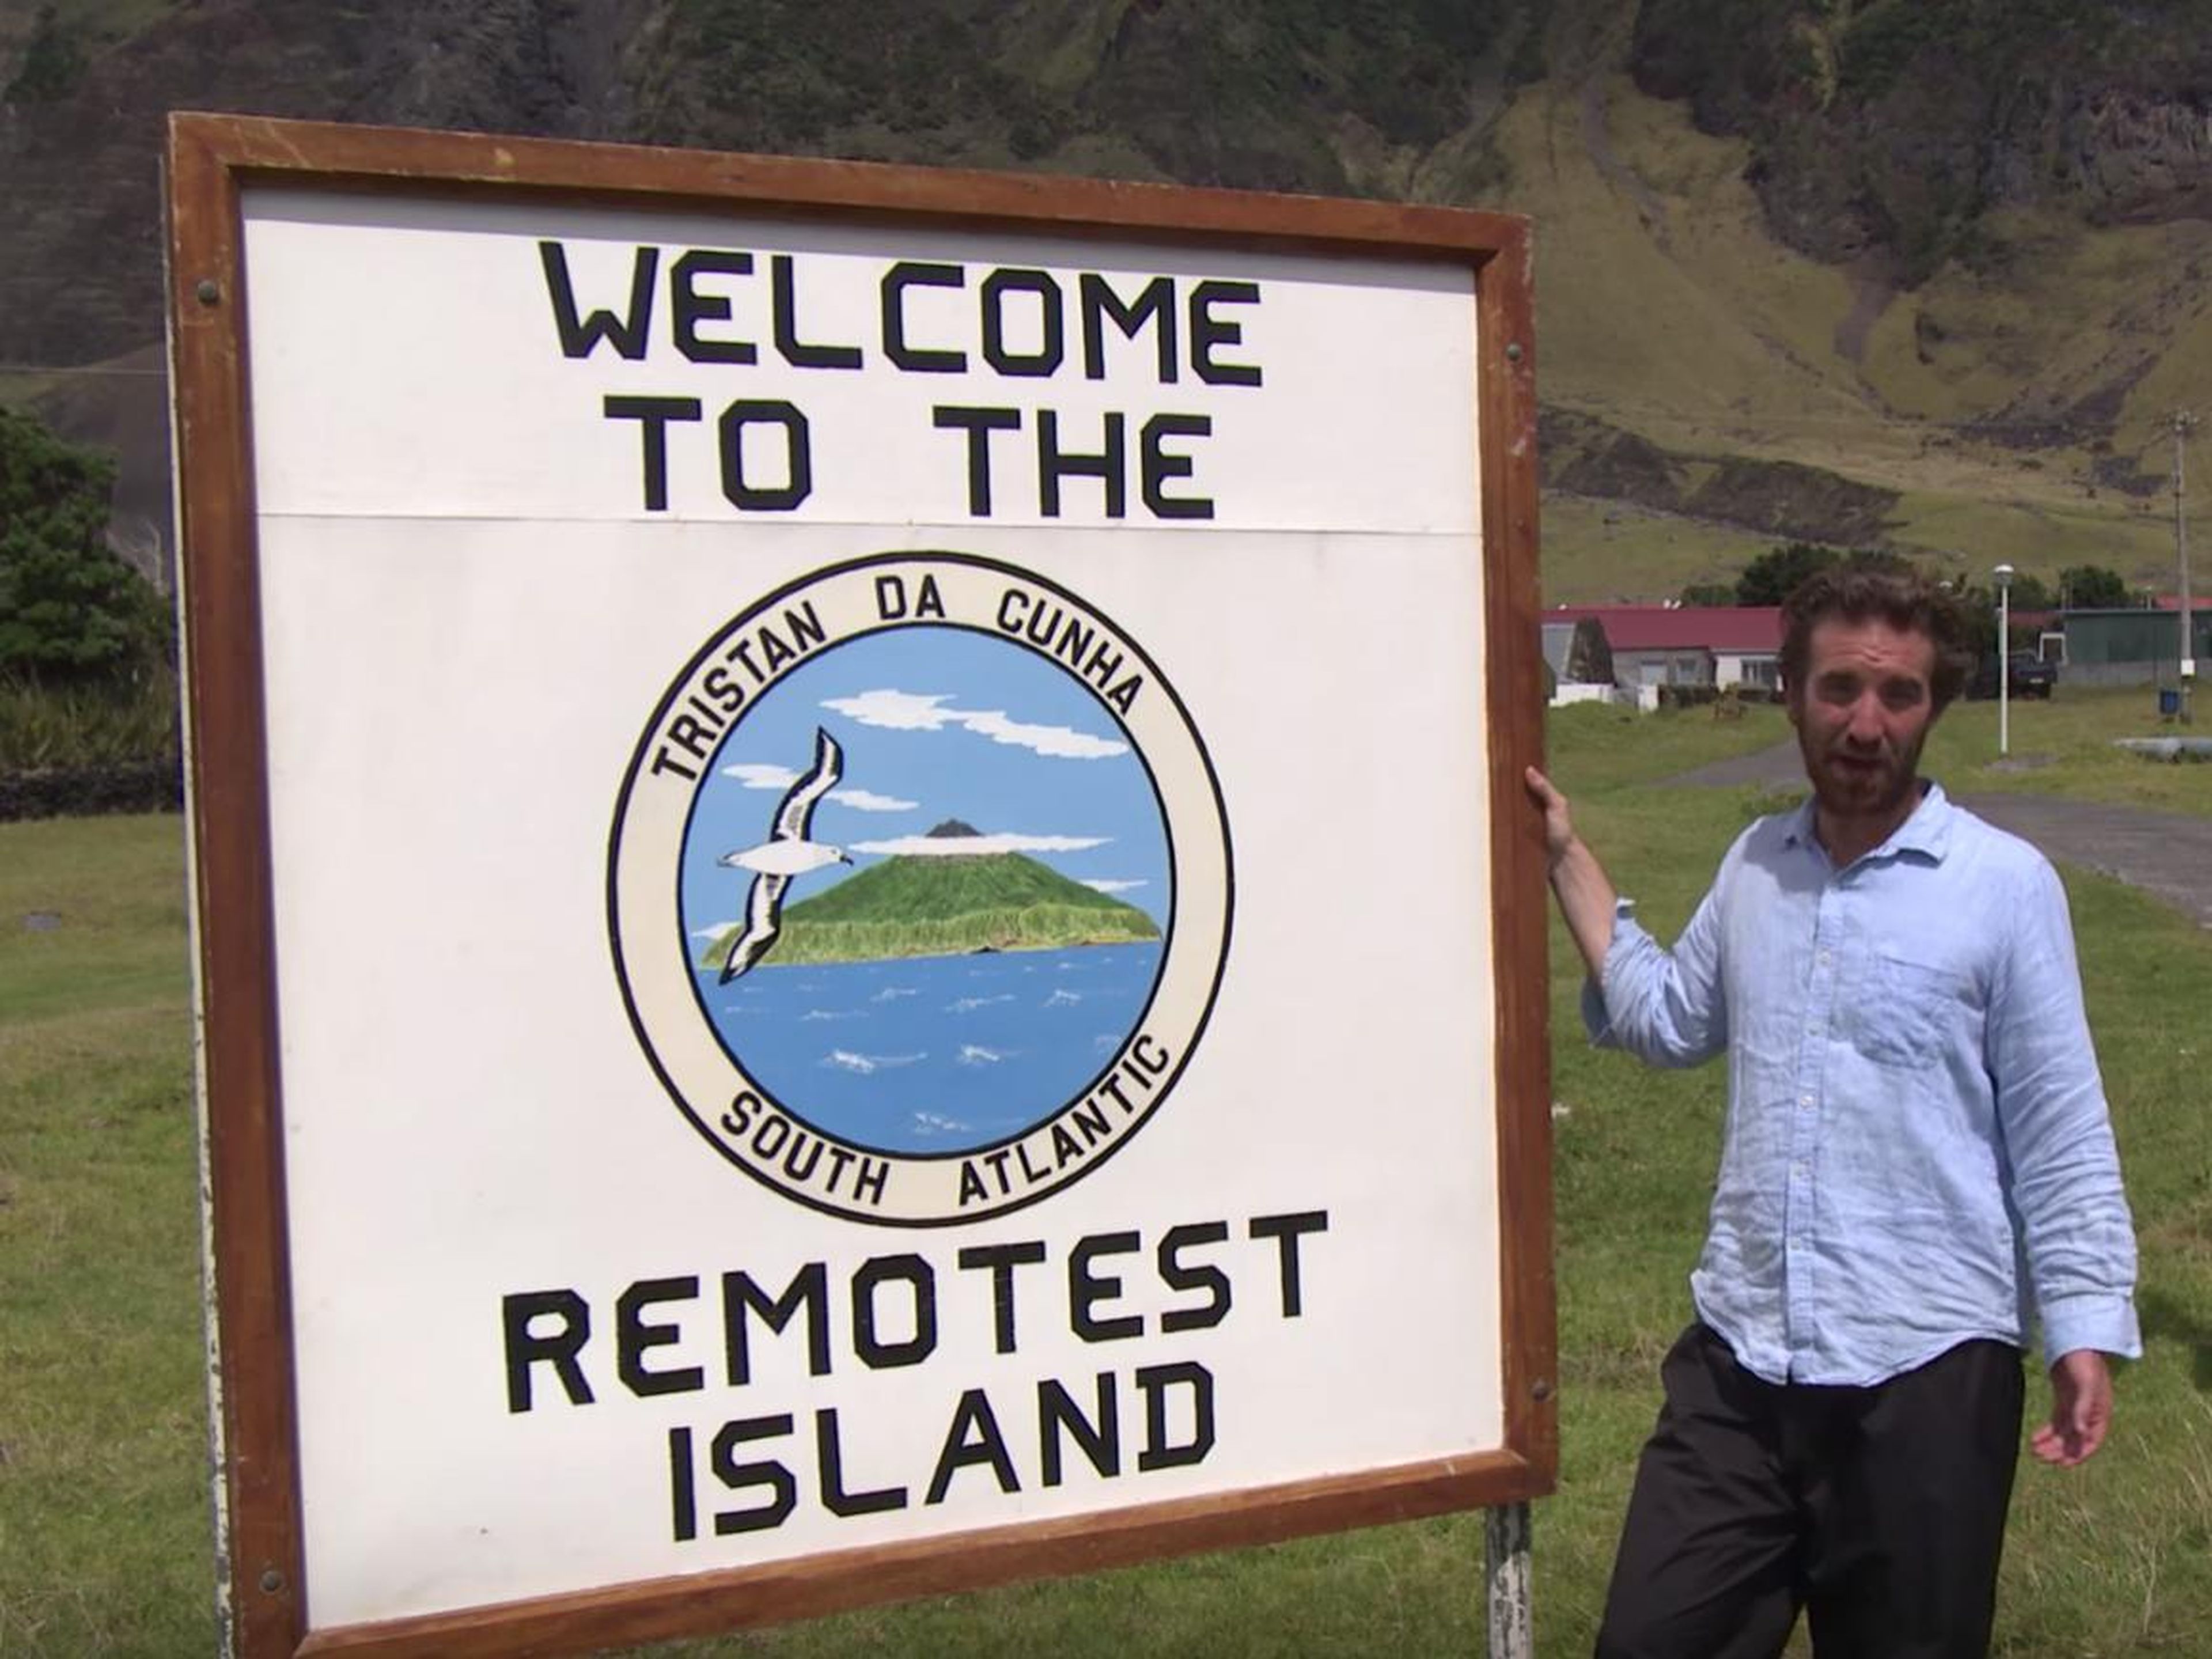 Being the remotest settled island in the world is Tristan's claim to fame.